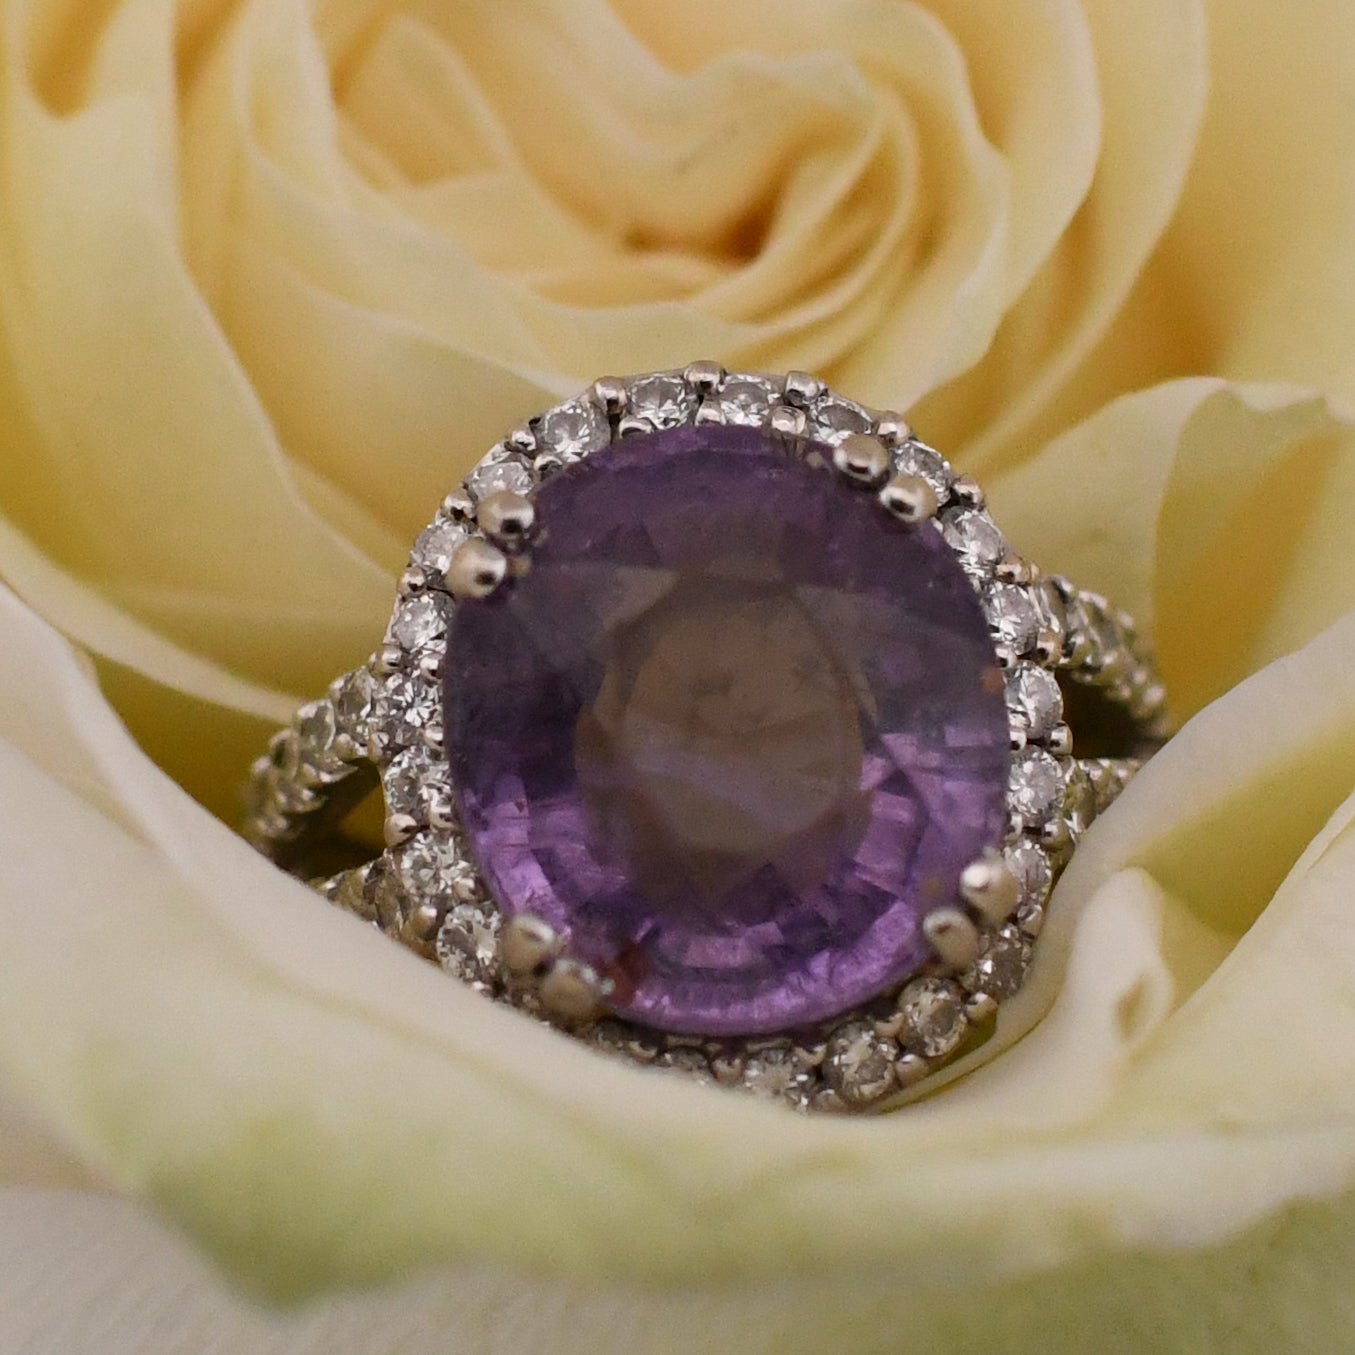 8 ct Kunzite Ring with Diamond Halo is a stunning cocktail ring that embodies modern luxury. Featuring an approximately 8 carat kunzite gemstone, renowned for its delicate pink hue, this ring exudes elegance and sophistication. The kunzite is